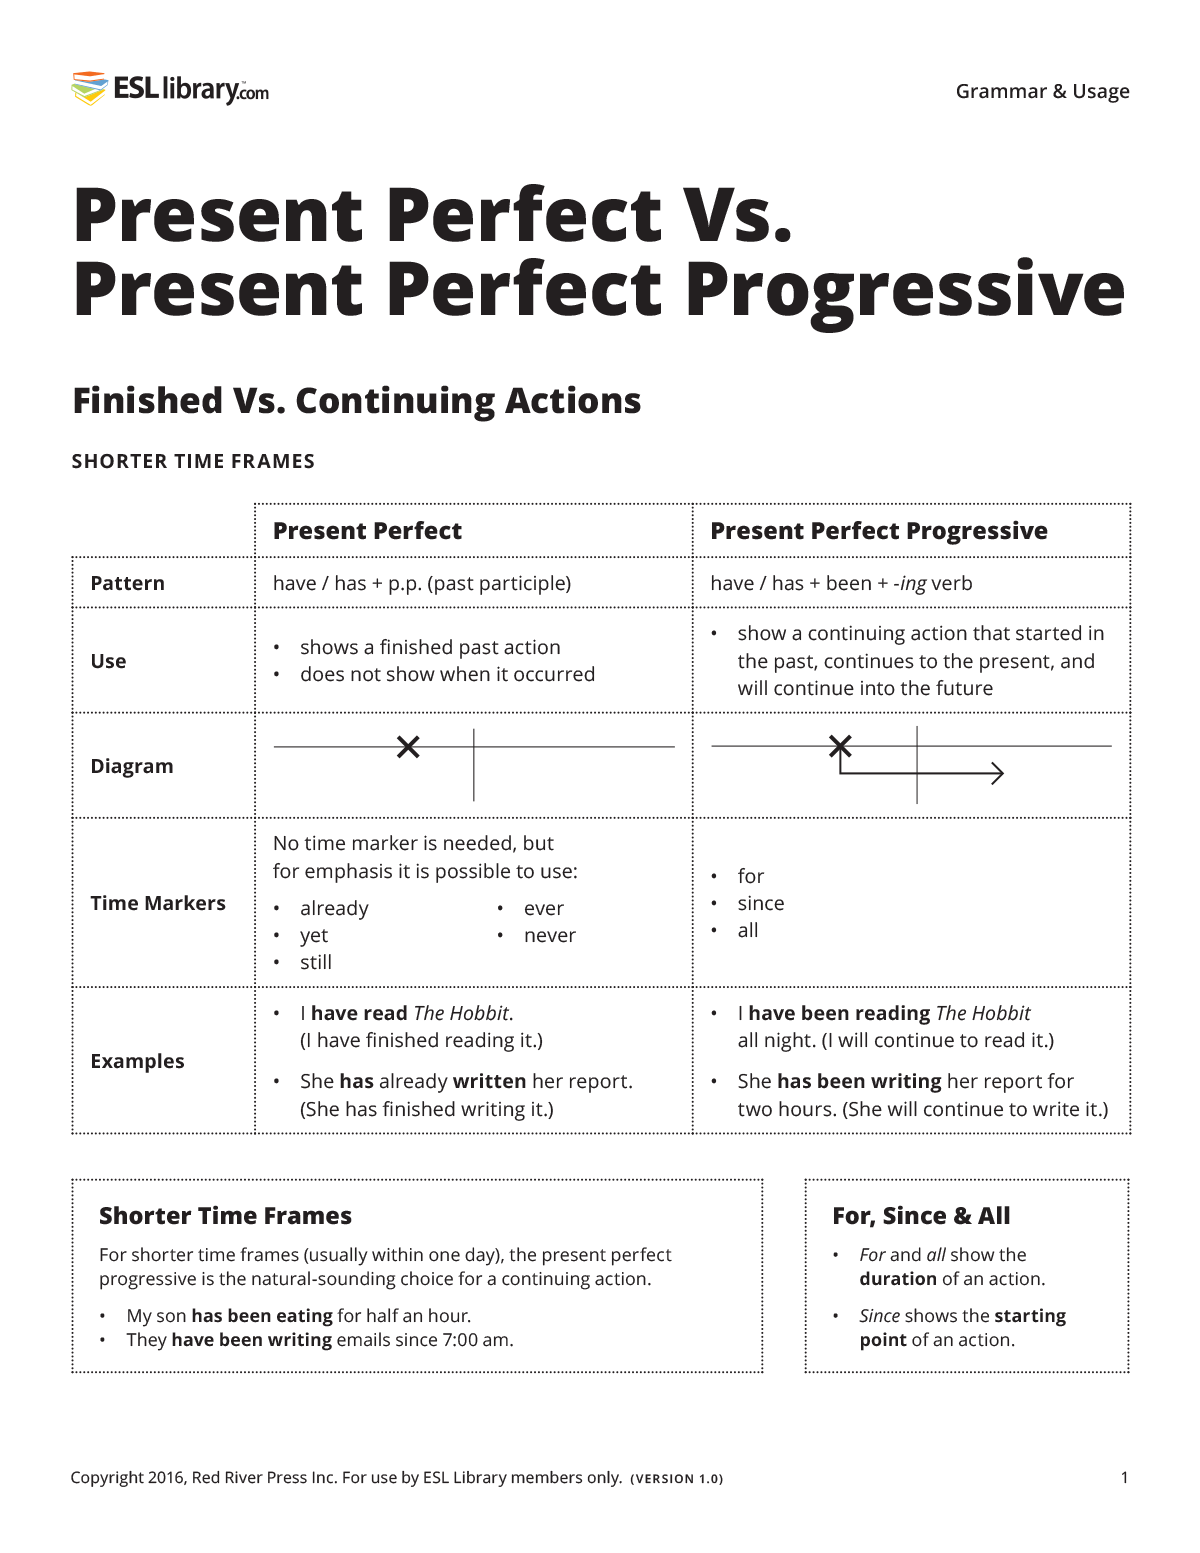 Difference between present perfect and present perfect progressive